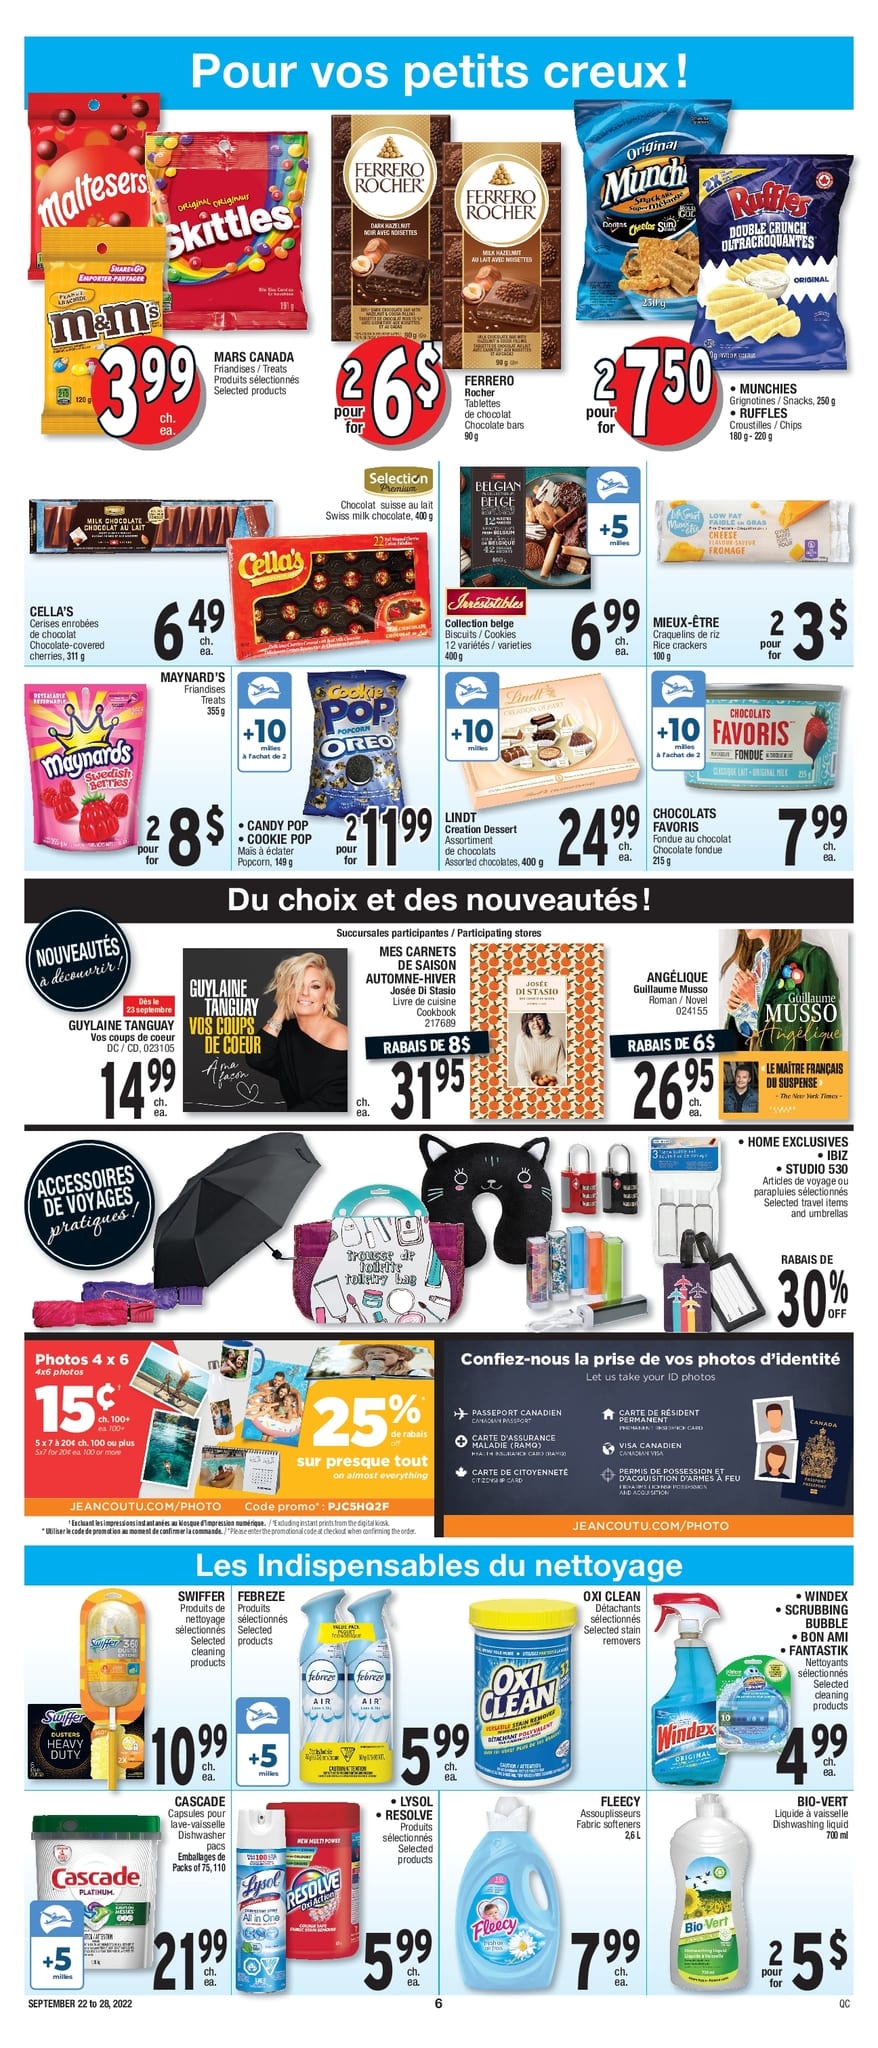 Circulaire Jean Coutu - Page 5